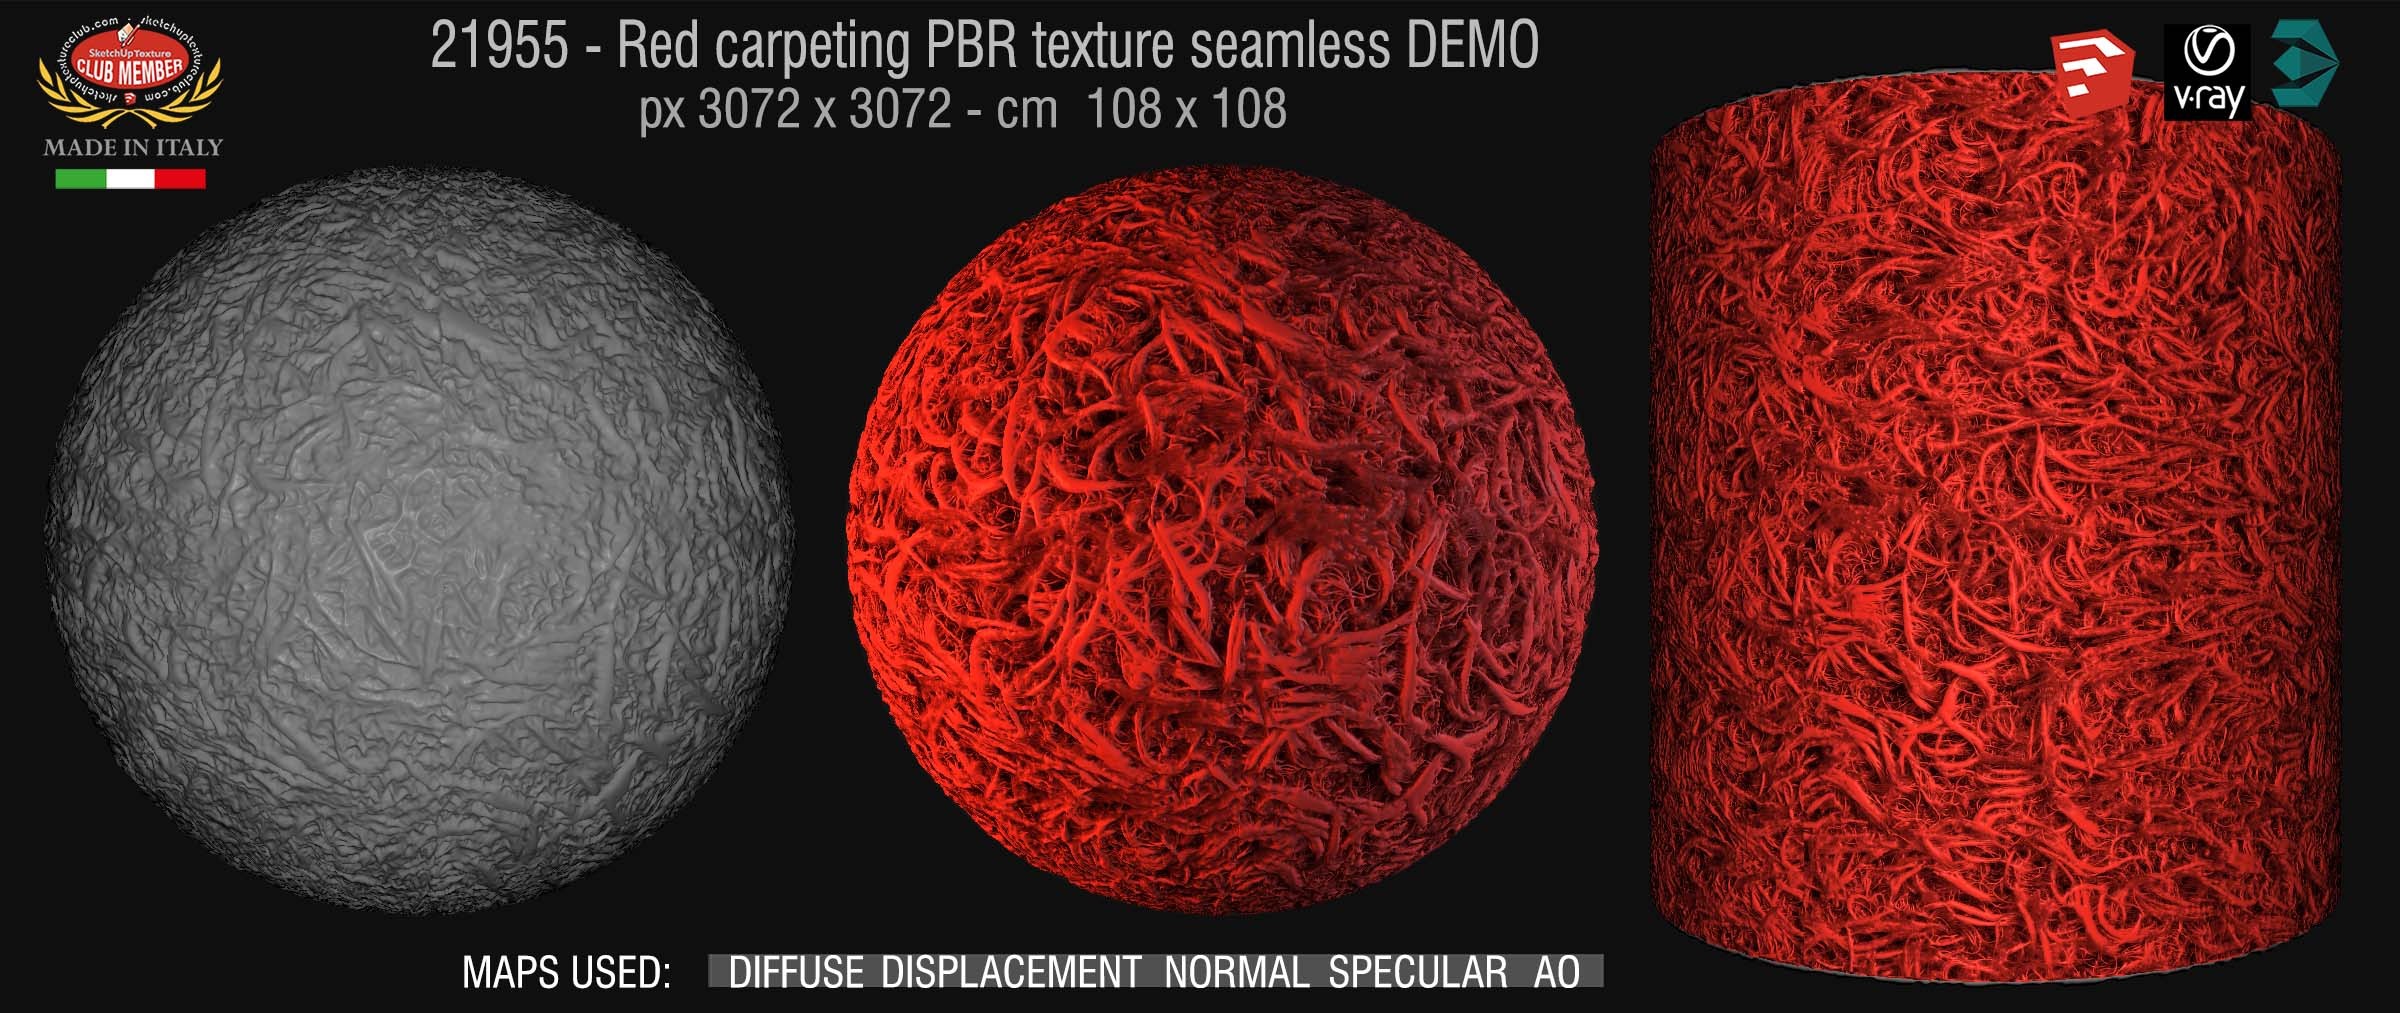 21955 Red carpeting PBR texture seamless DEMO